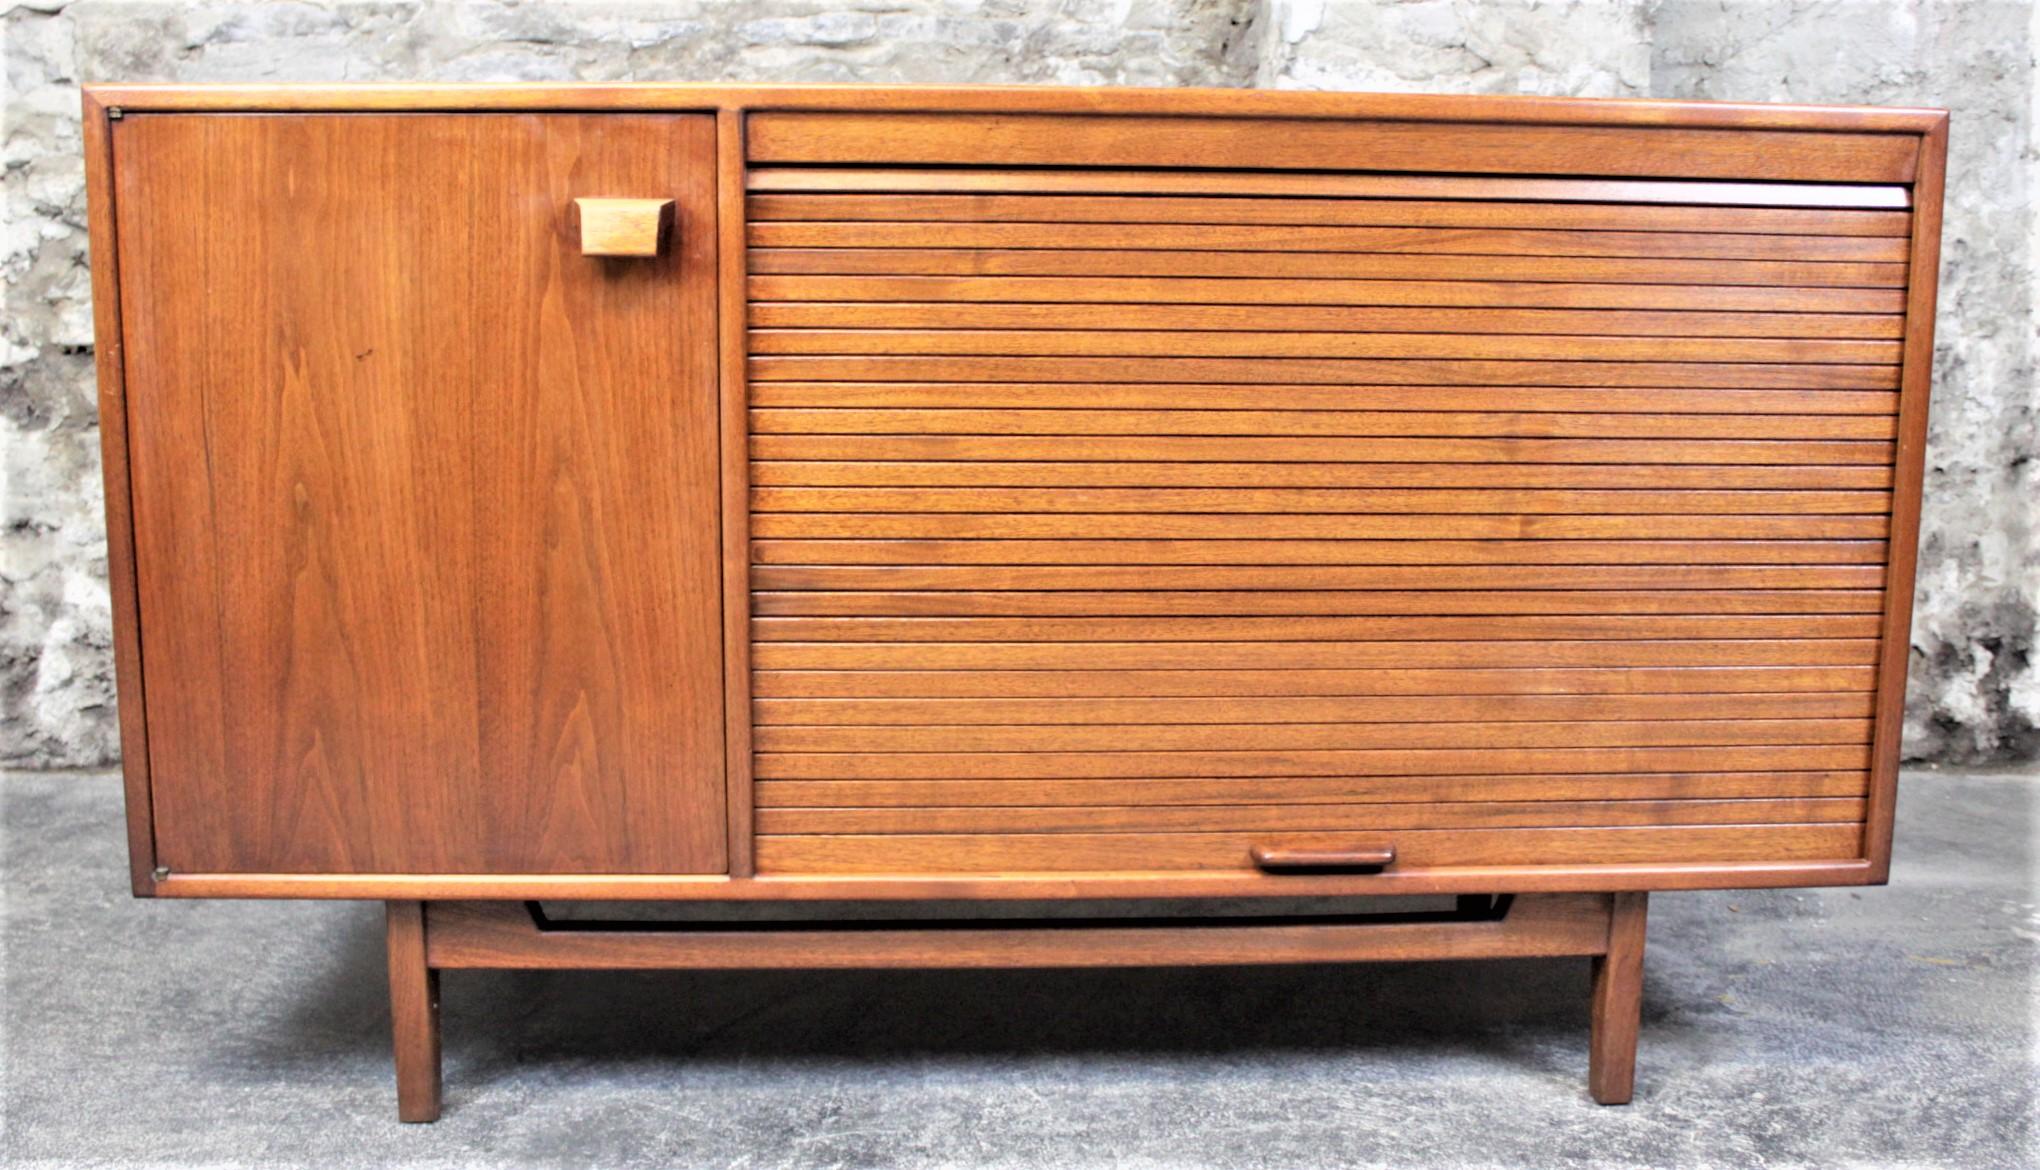 This small walnut credenza is done by the noted designer, Jens Risom and made in the United States in circa 1965 in the period Mid-Century Modern style. The credenza is done in dark walnut with both a swing door and tambour door on the front with